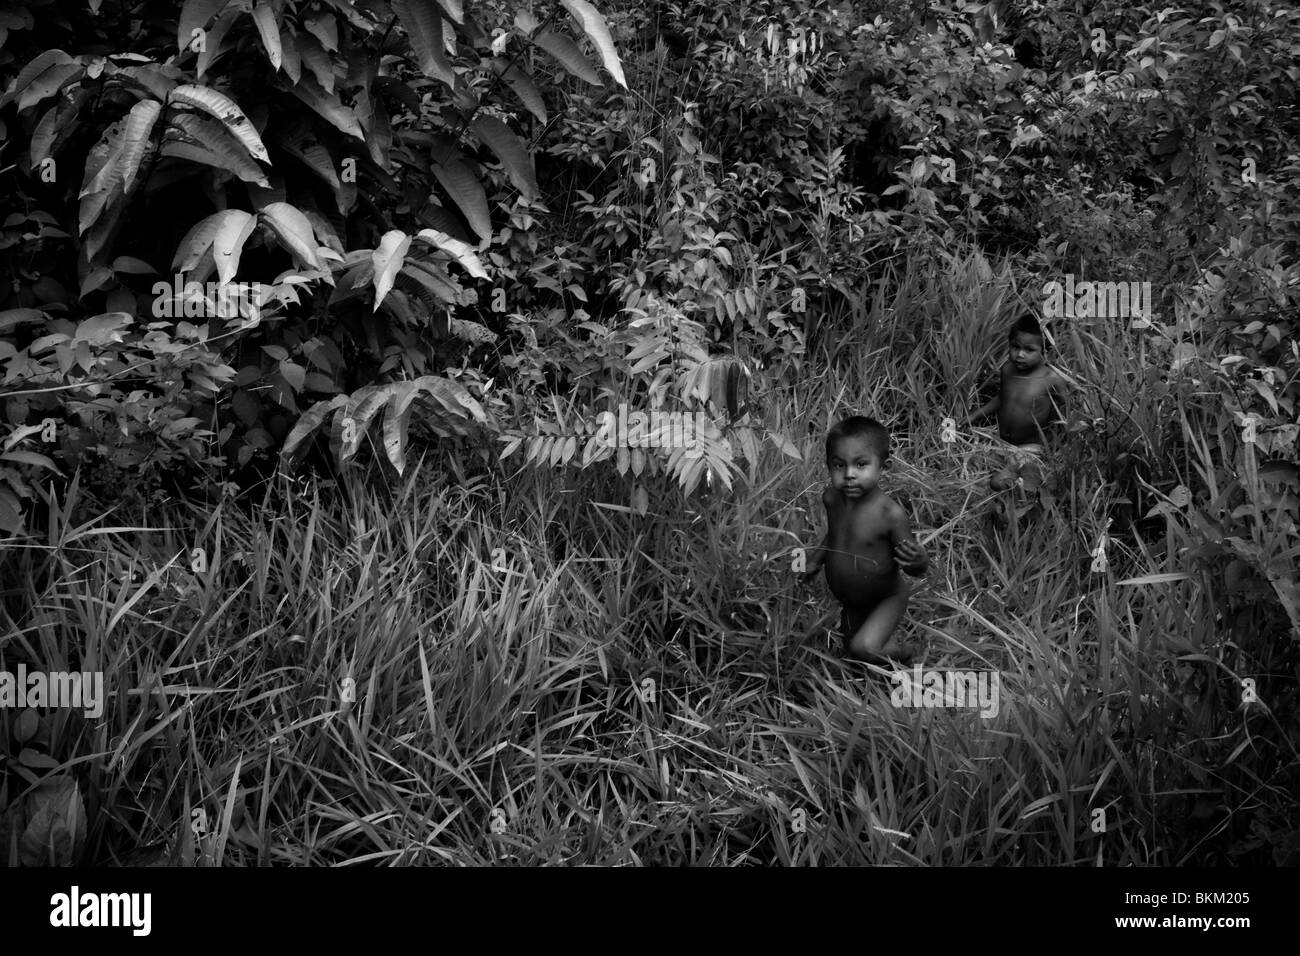 Nukak kids passing through a dense jungle around their refugee camp close to San Jose del Guaviare, Colombia. Stock Photo